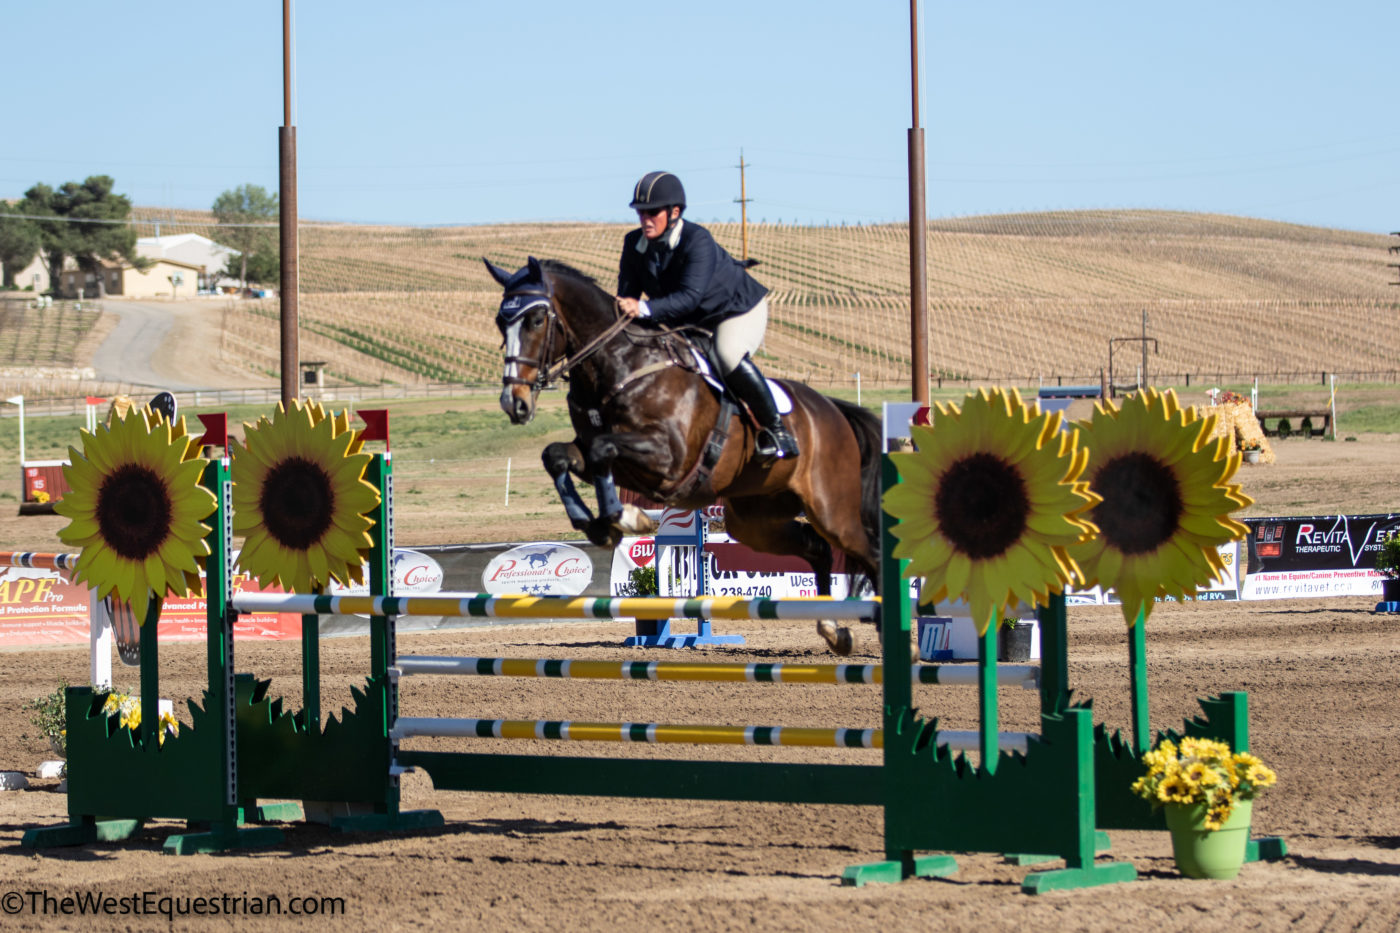 CCI3*-S - 3rd - Gina Economou and Cooley By Design. TheWestEquestrian.com Photo.